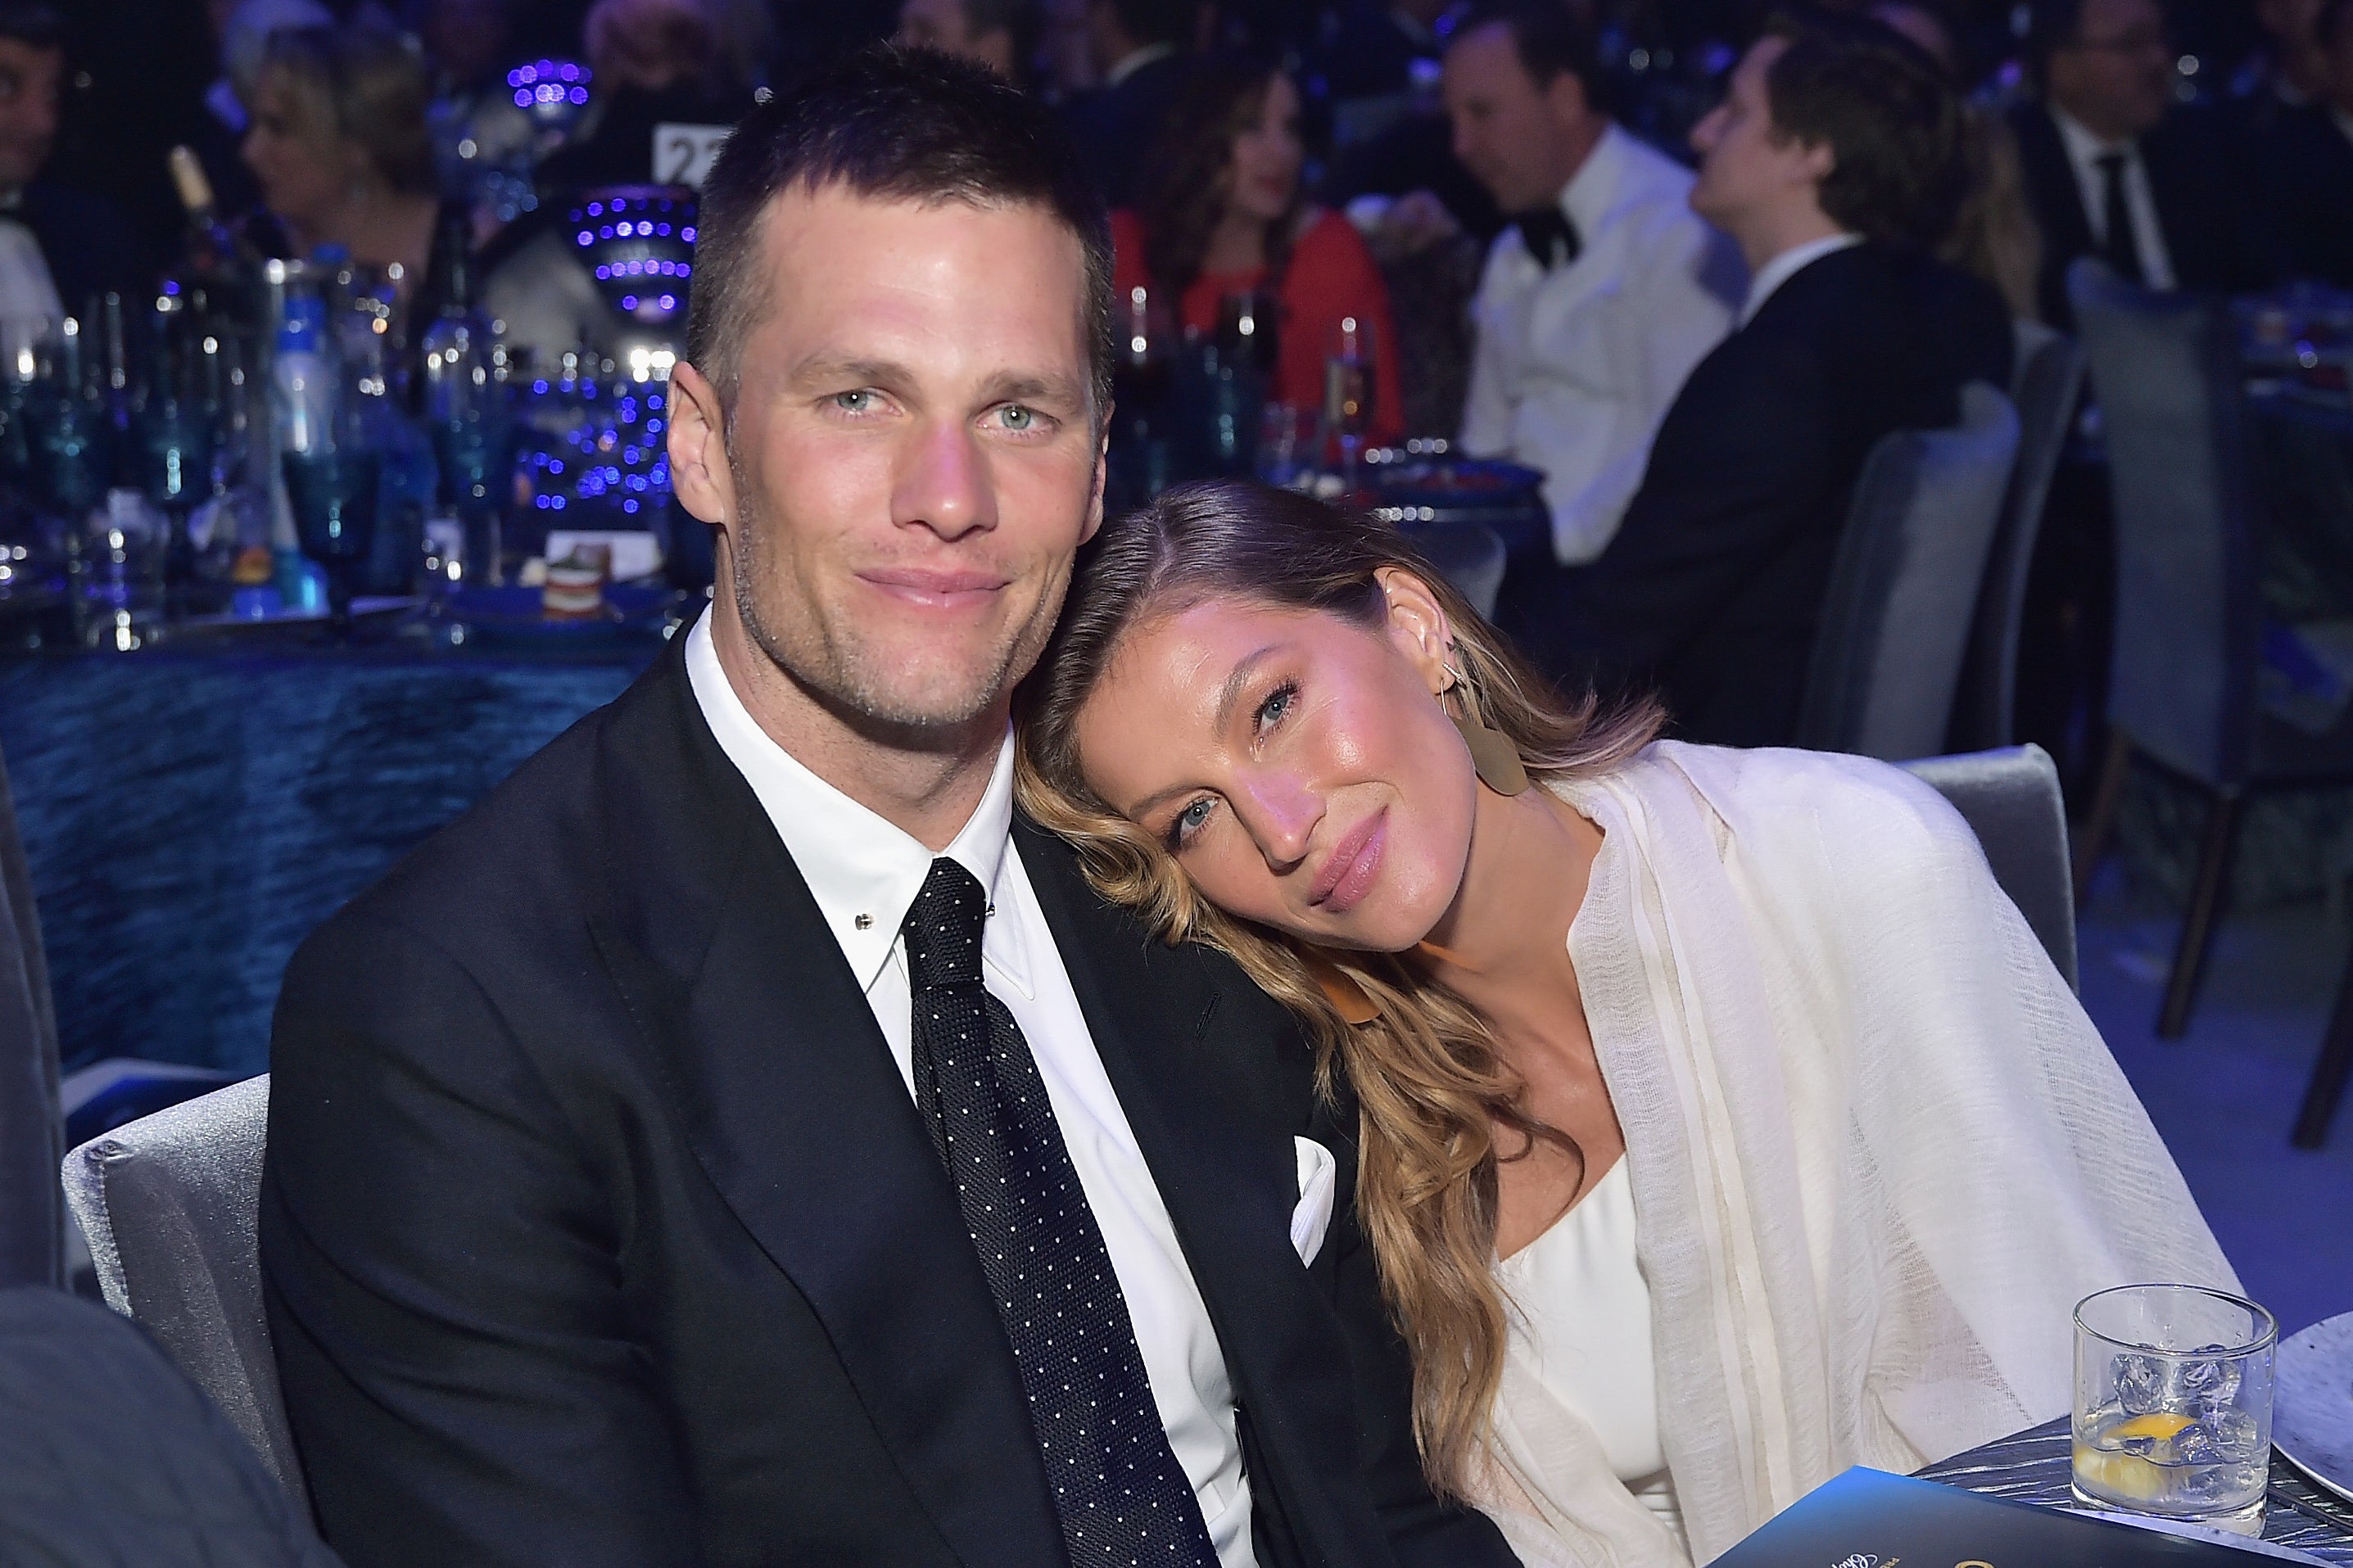 Gisele Bündchen And Tom Brady’s Kids Were Apparently “Affected” By His “Irresponsible” Netflix Roast, And Here Are All The Details